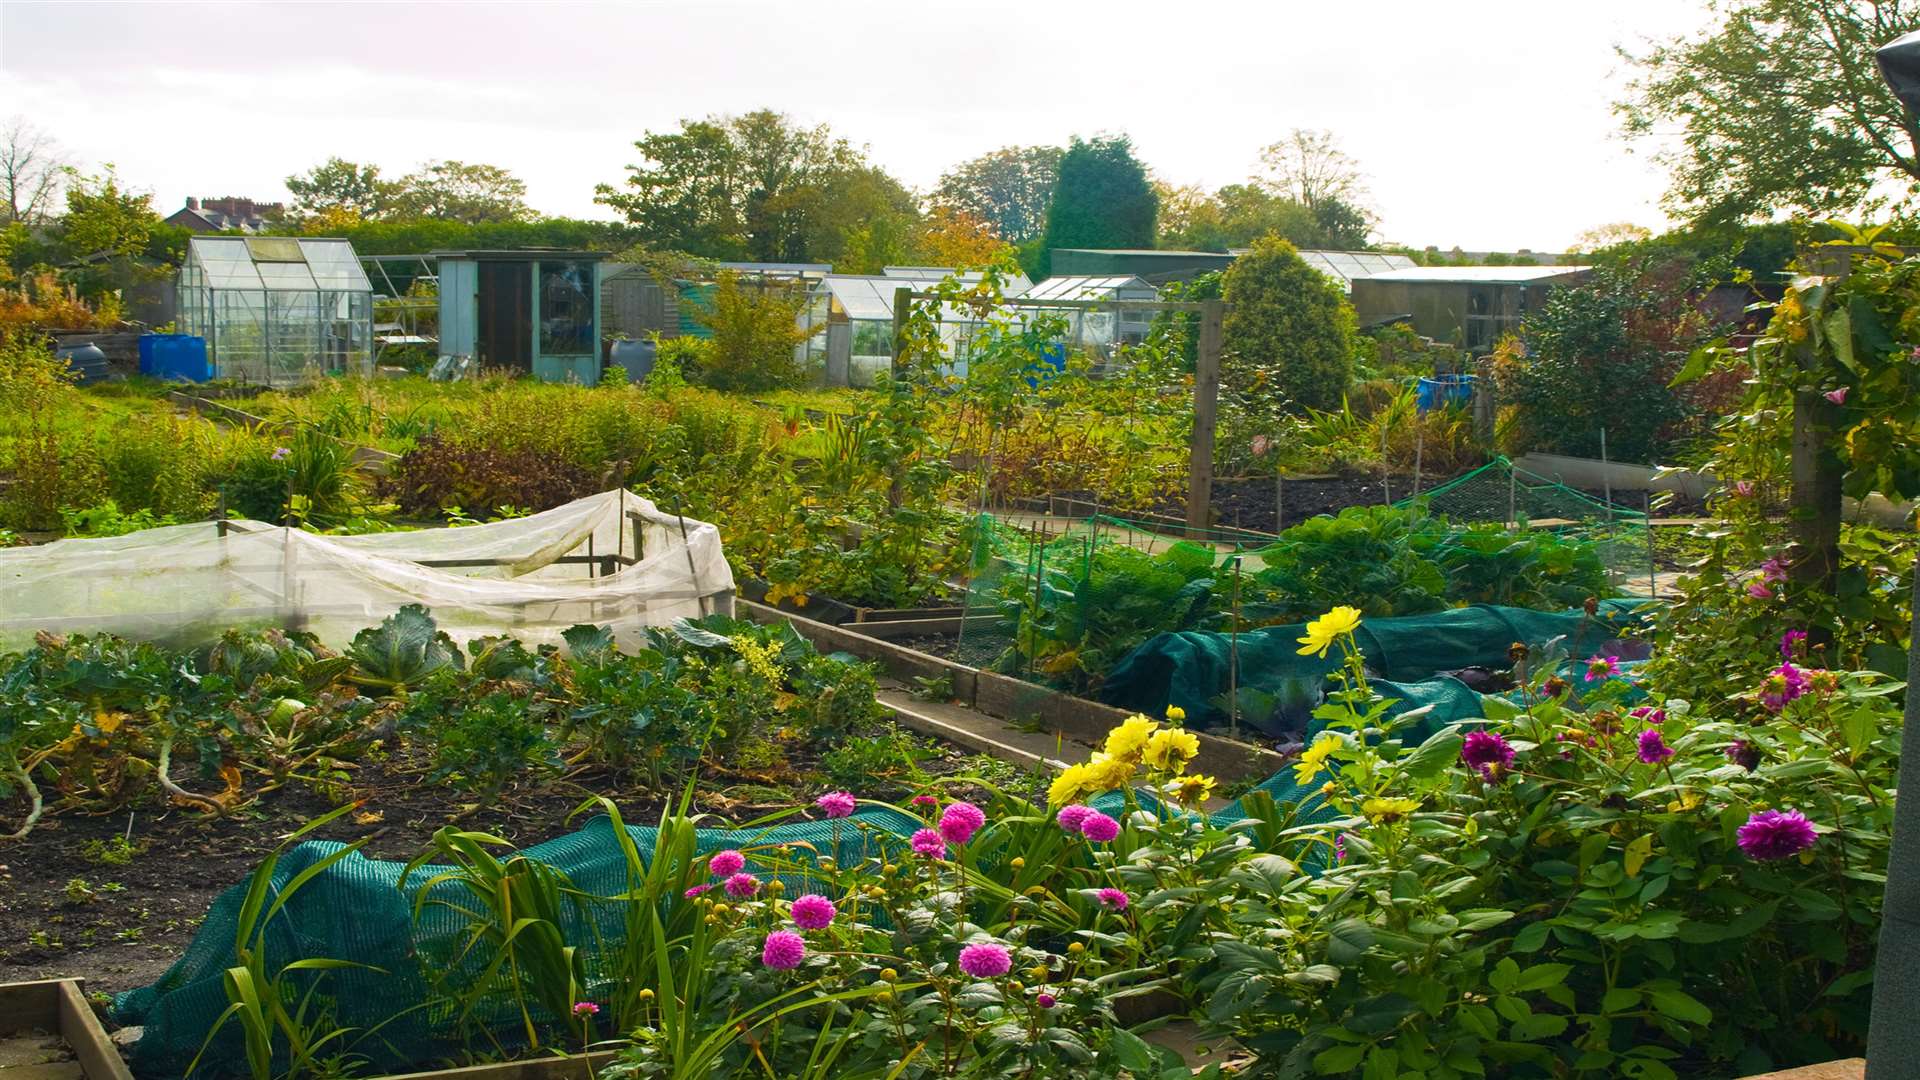 National Allotments Week takes place this month